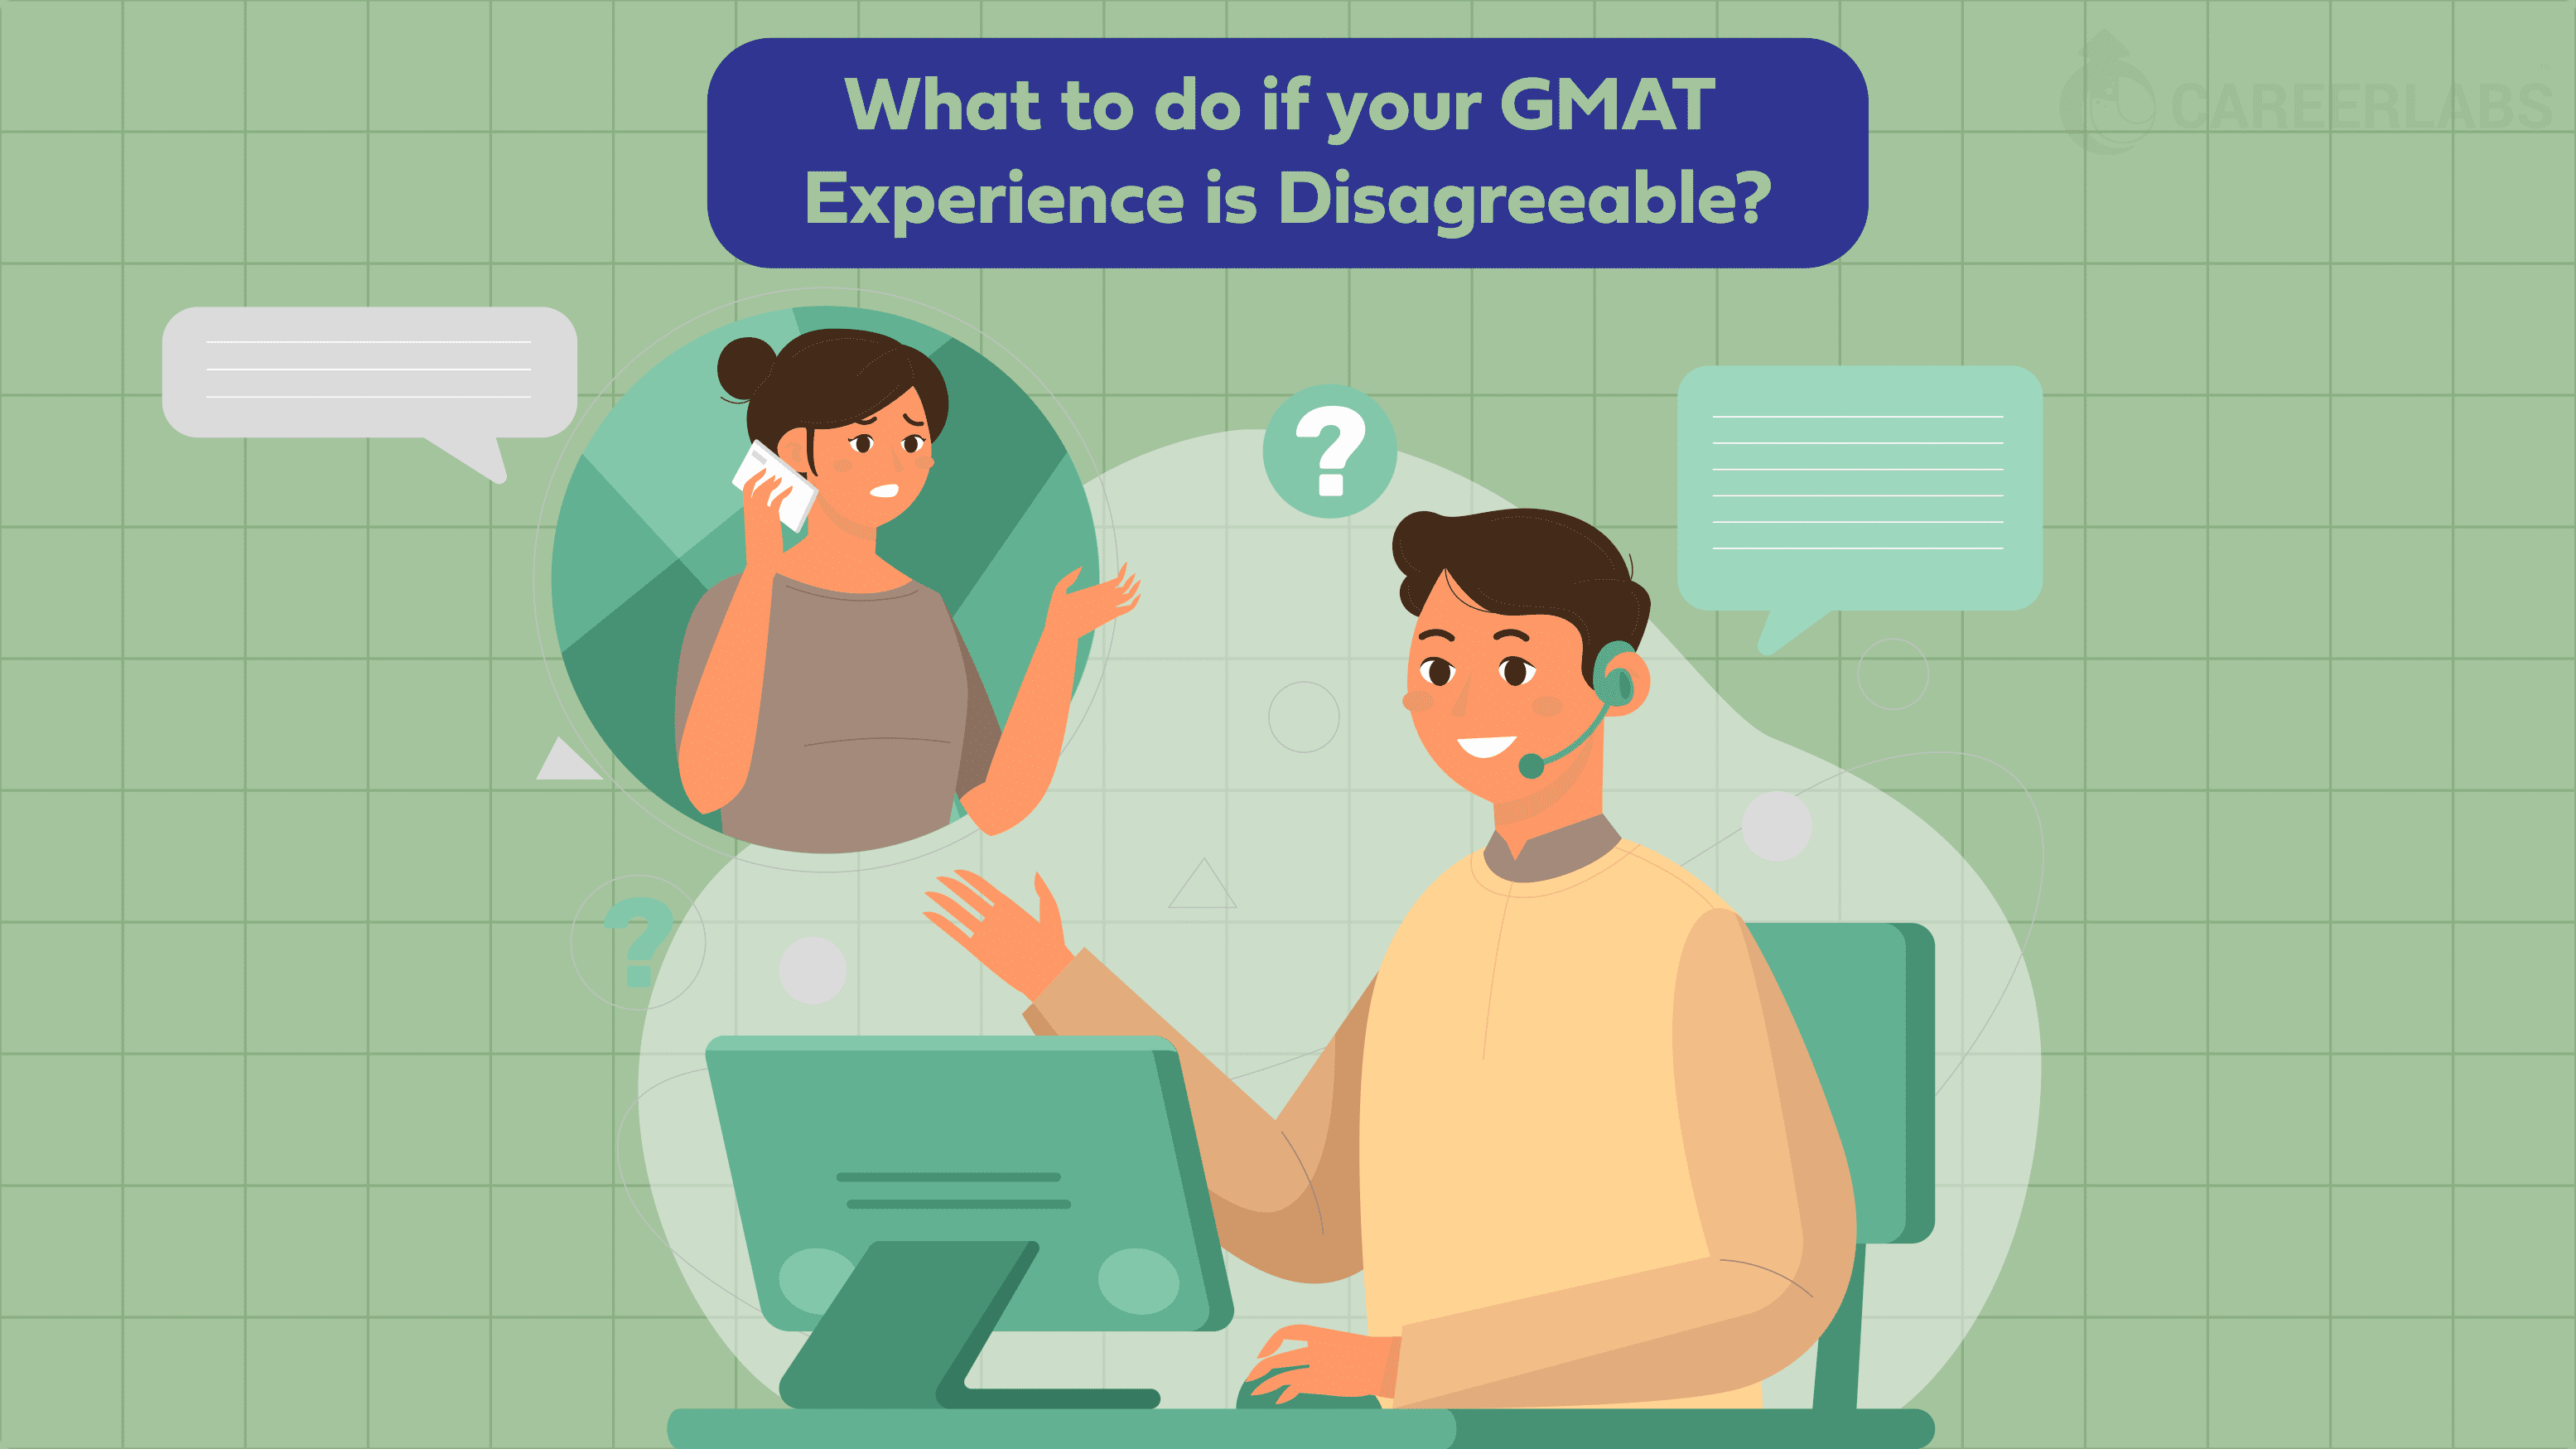 What To Do If Your GMAT Experience is Disagreeable?